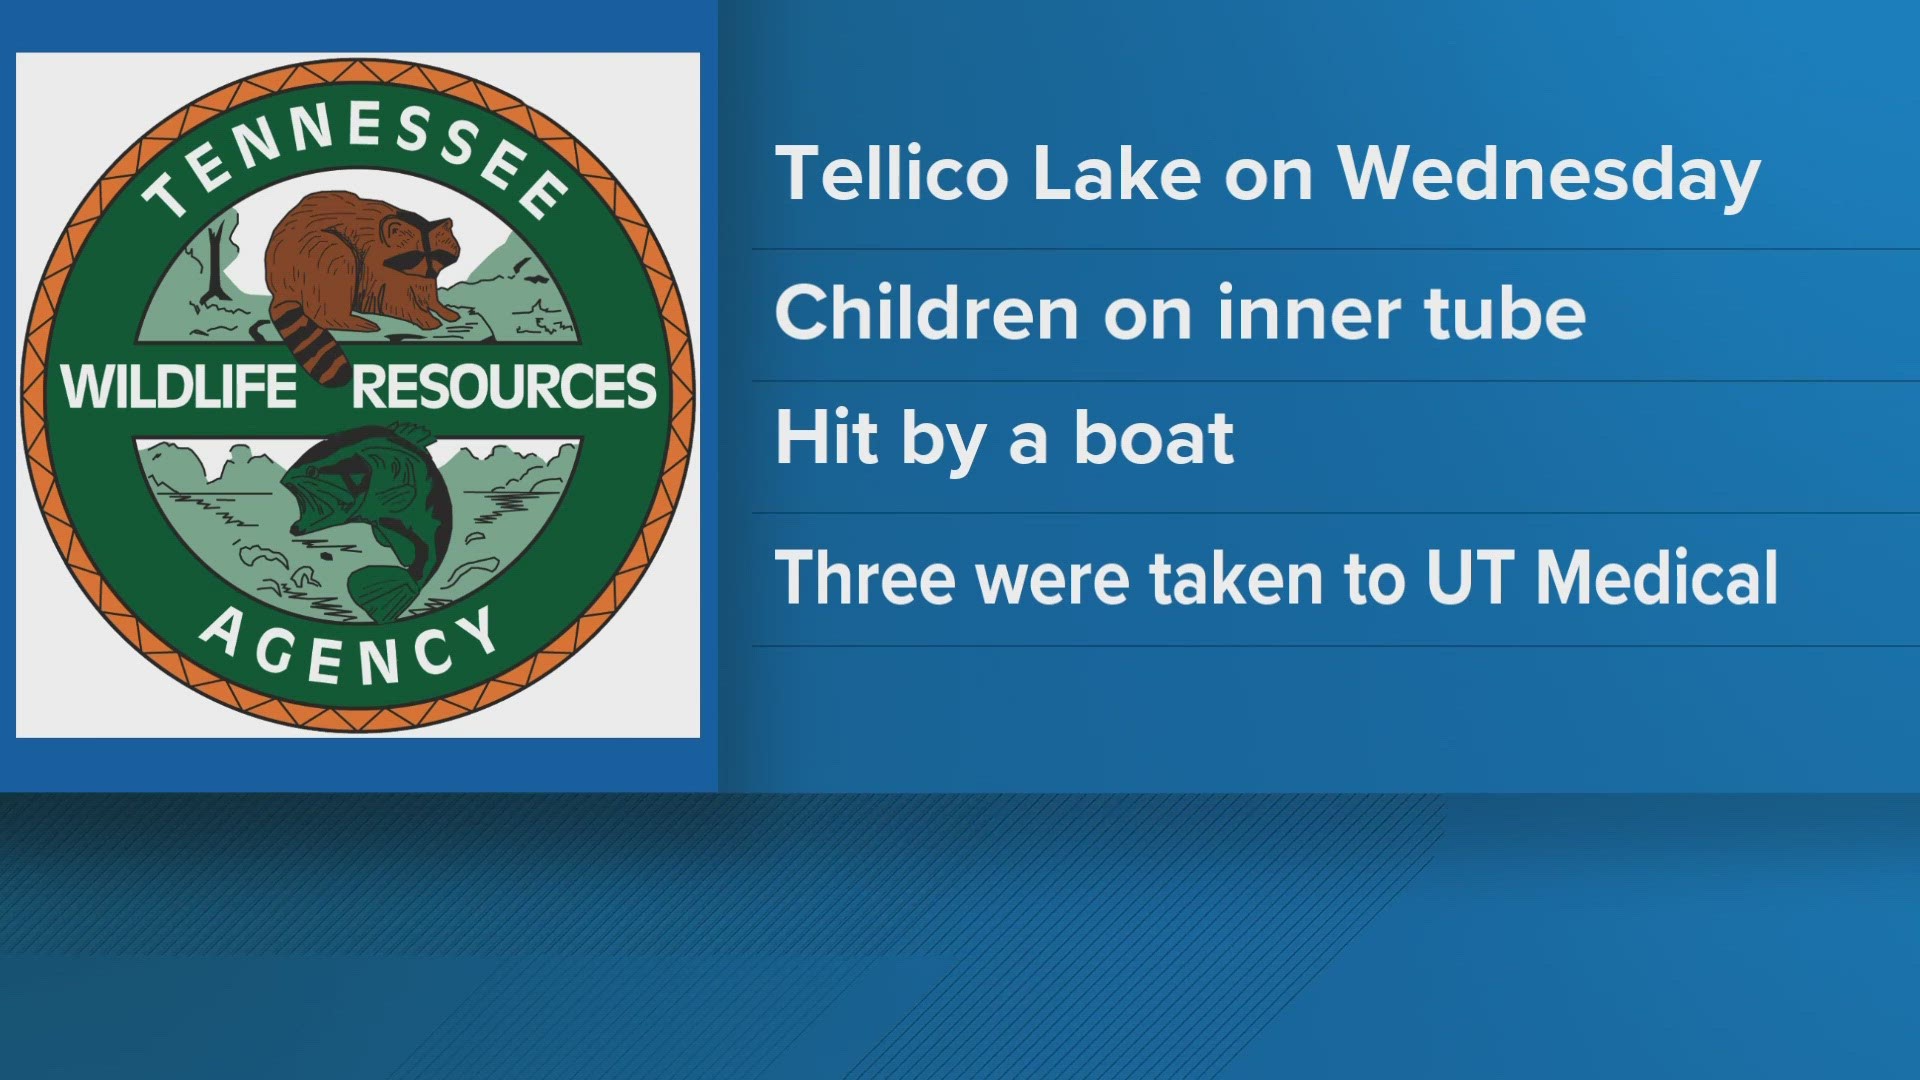 Two of the three children hurt in the boating wreck on Tellico Lake on Thursday should be released on Friday. The third child needs specialized treatment, TWRA says.